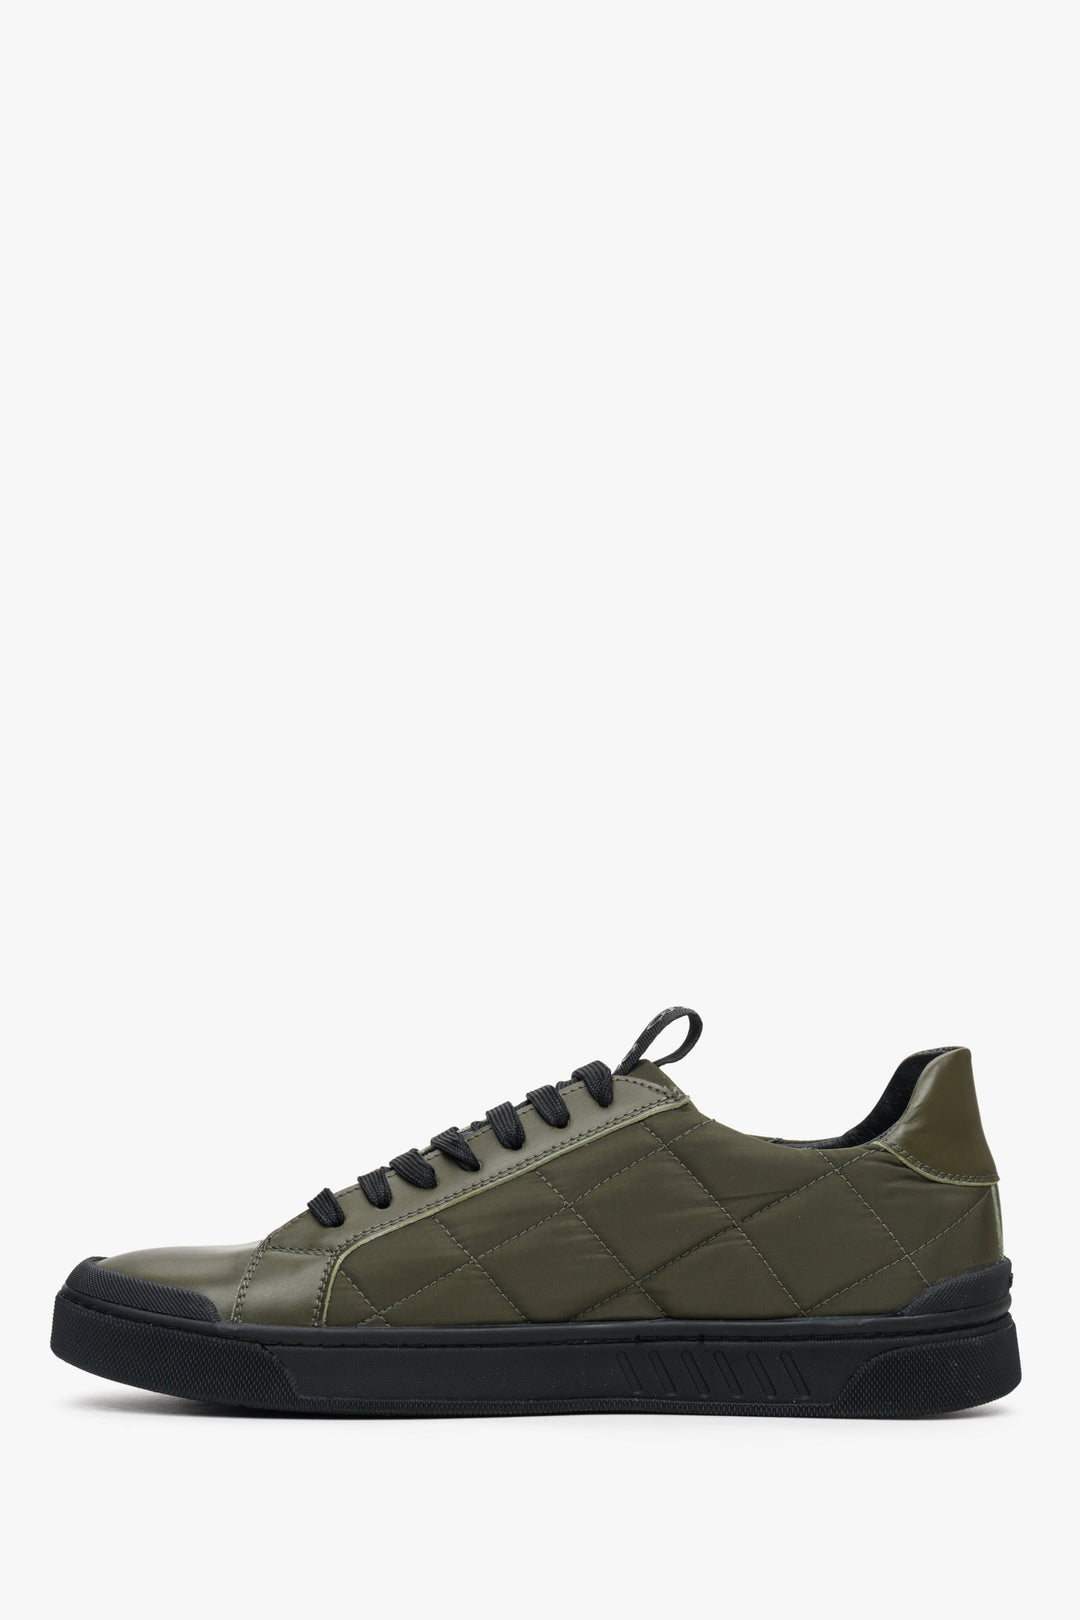 Men's sneakers in green color from natural leather and textiles Estro - shoe profile.